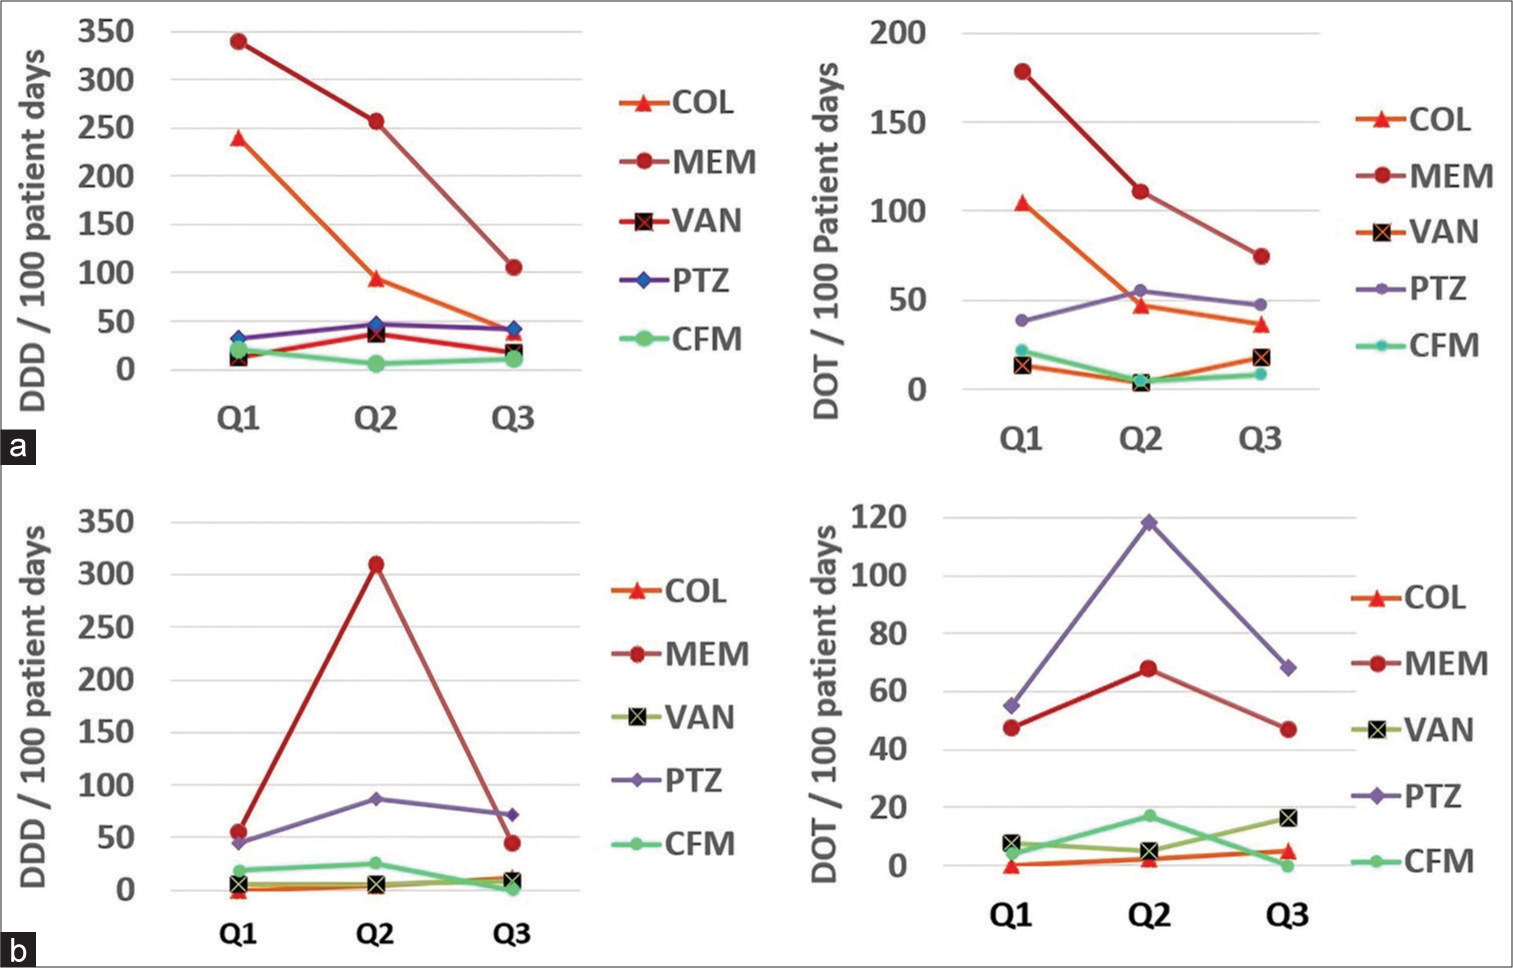 Quarter-wise trend in defined daily dose and days of therapy per 100 days: (a) High-priority areas (b) Low-priority areas. COL: Colistin, MEM: Meropenem, VAN: Vancomycin, PTZ: Piperacillin-tazobactam, CFM: Cefoperazone, Q1: Quarter 1, Q2: Quarter 2, Q3: Quarter 3, Q4: Quarter 4. DOT: Days of therapy, DDD: Defined daily dose